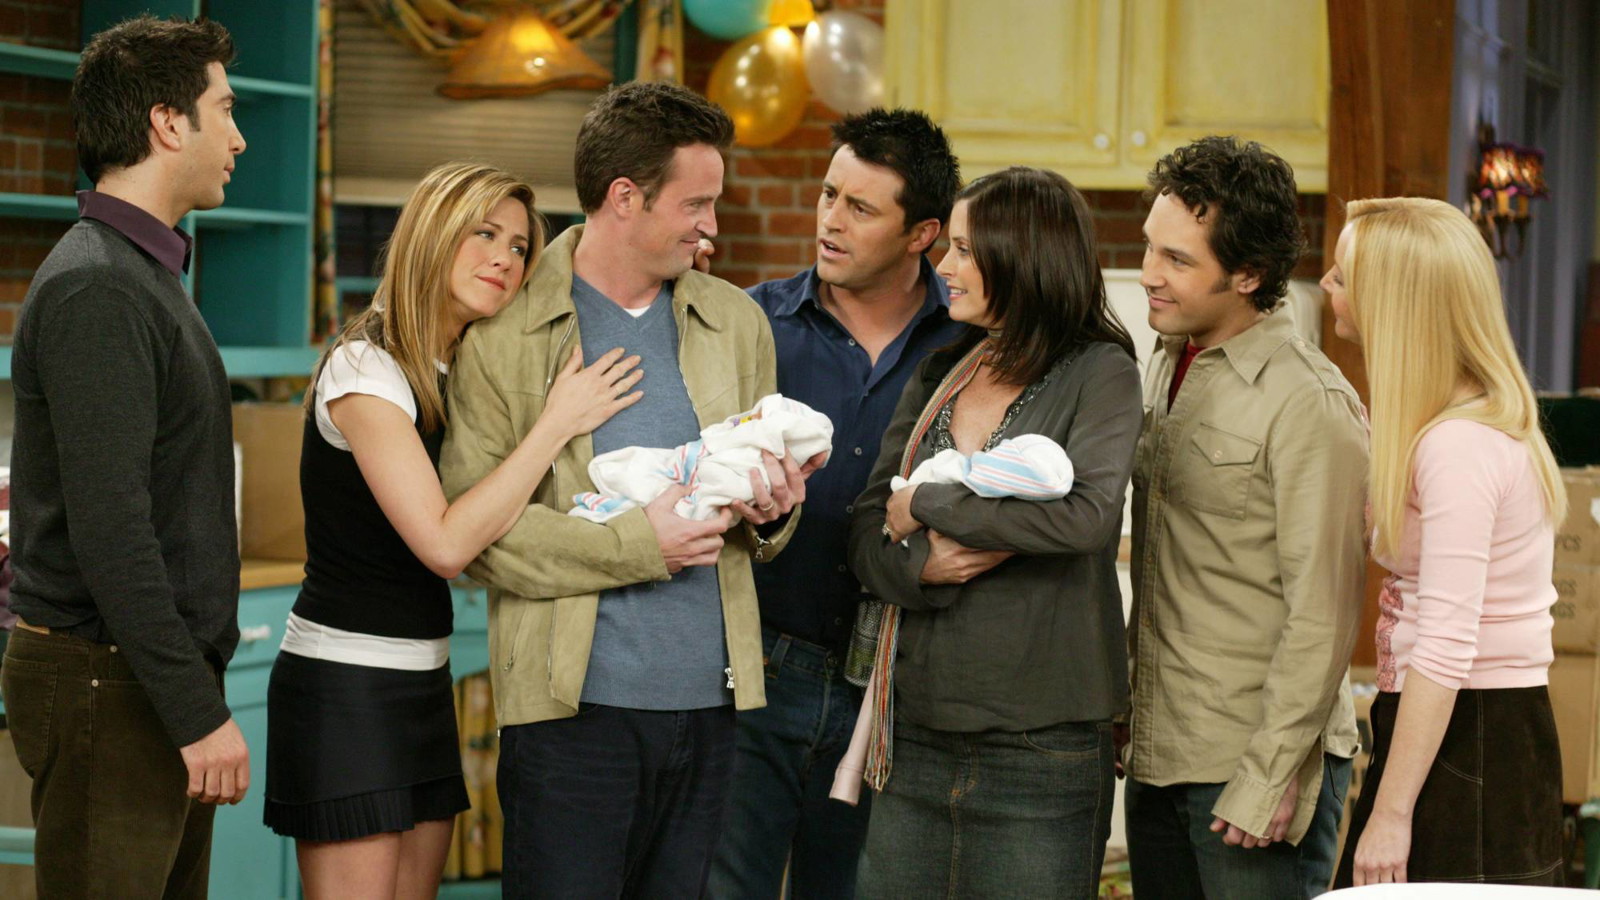 Paul Rudd along with the rest of the cast in Friends | NBC